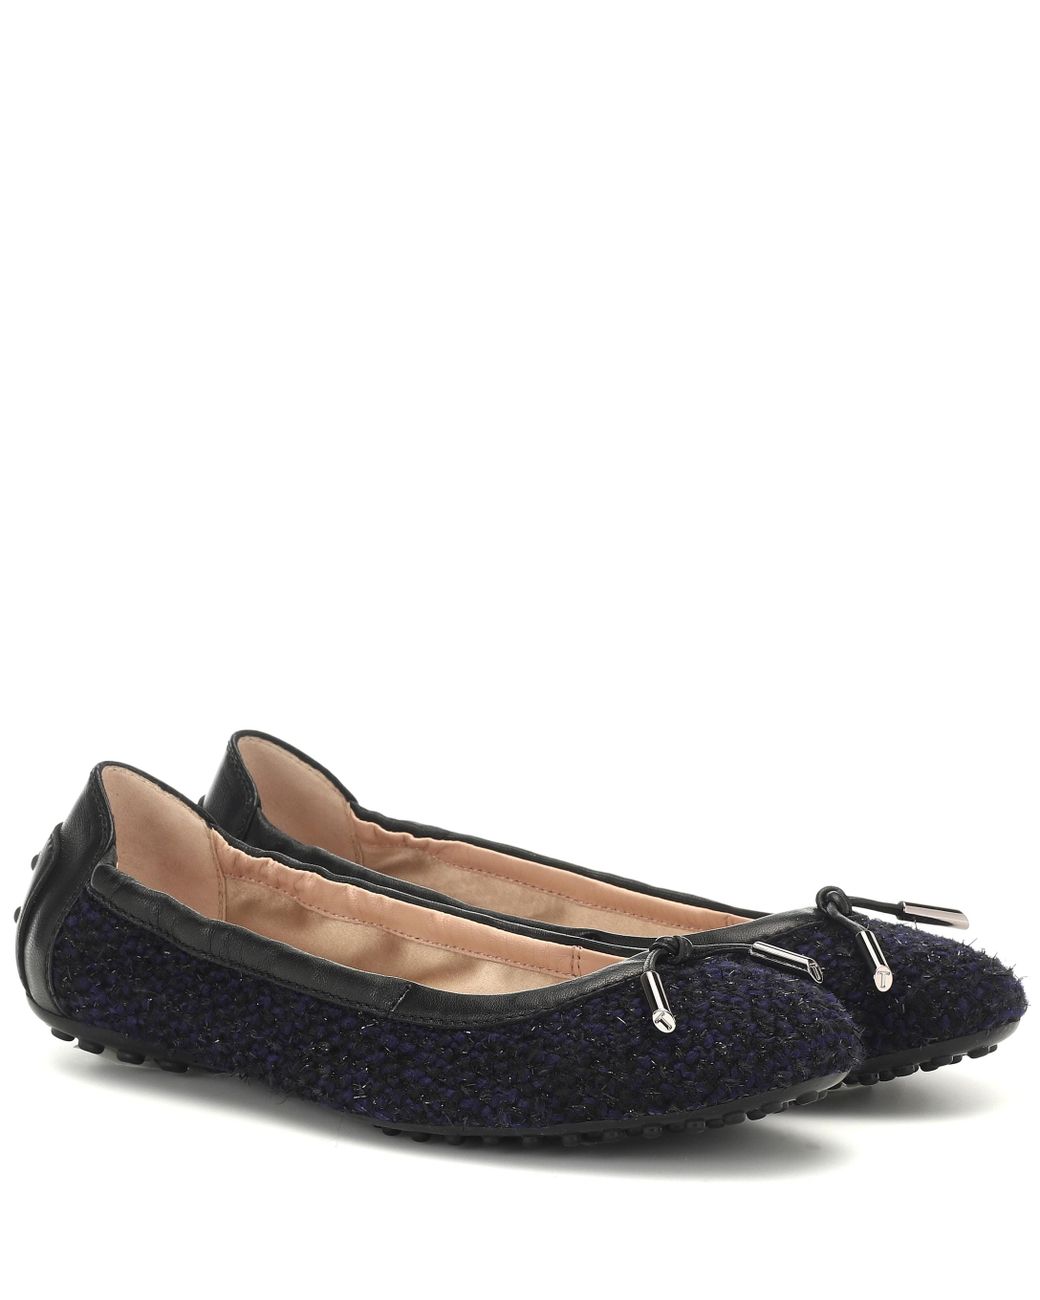 Tod's Gommino Tweed Ballet Flats in Blue - Lyst